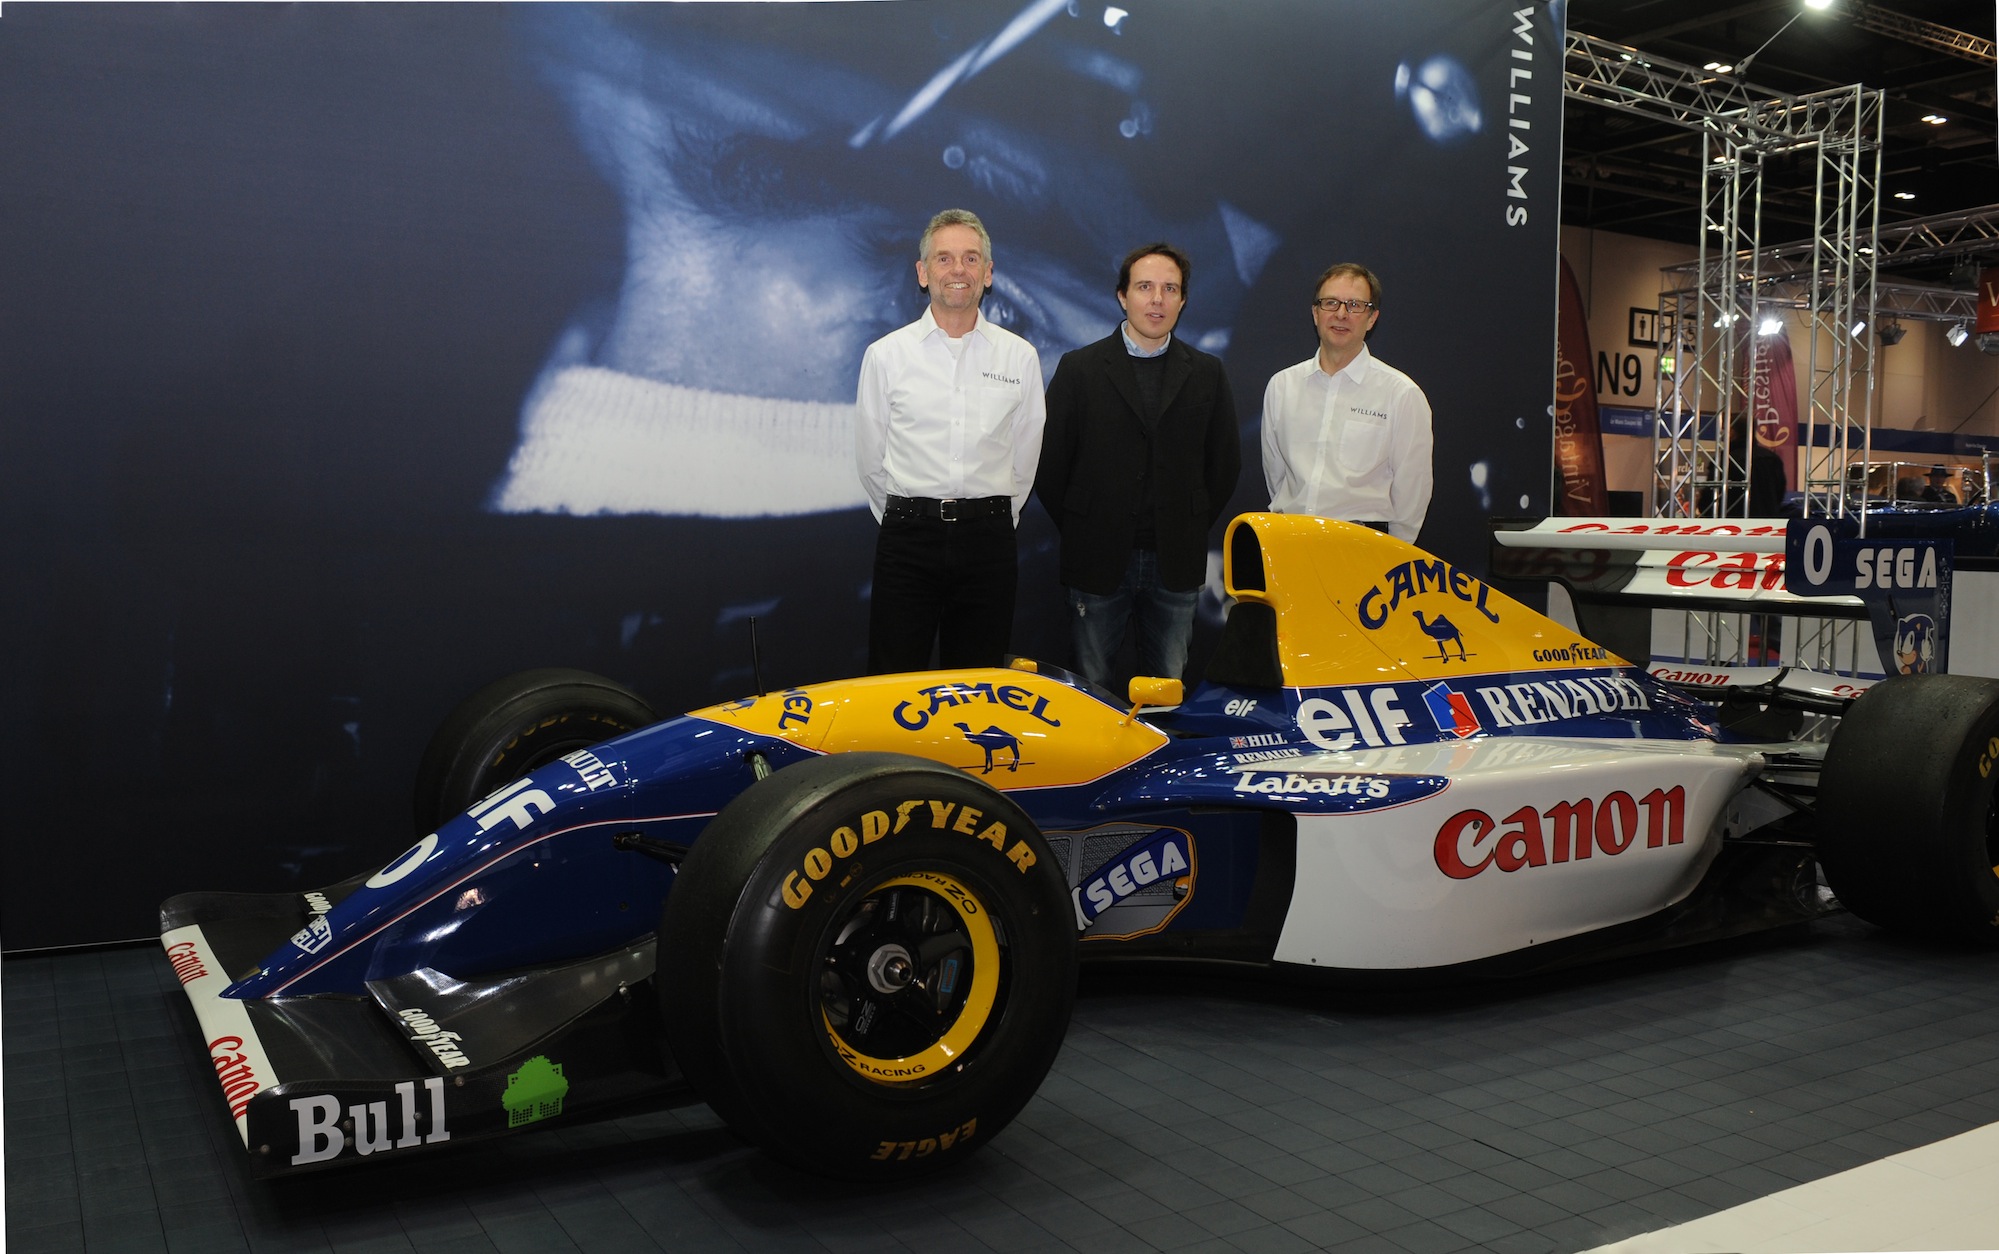 Williams step up their Heritage programme at The London Classic Car Show